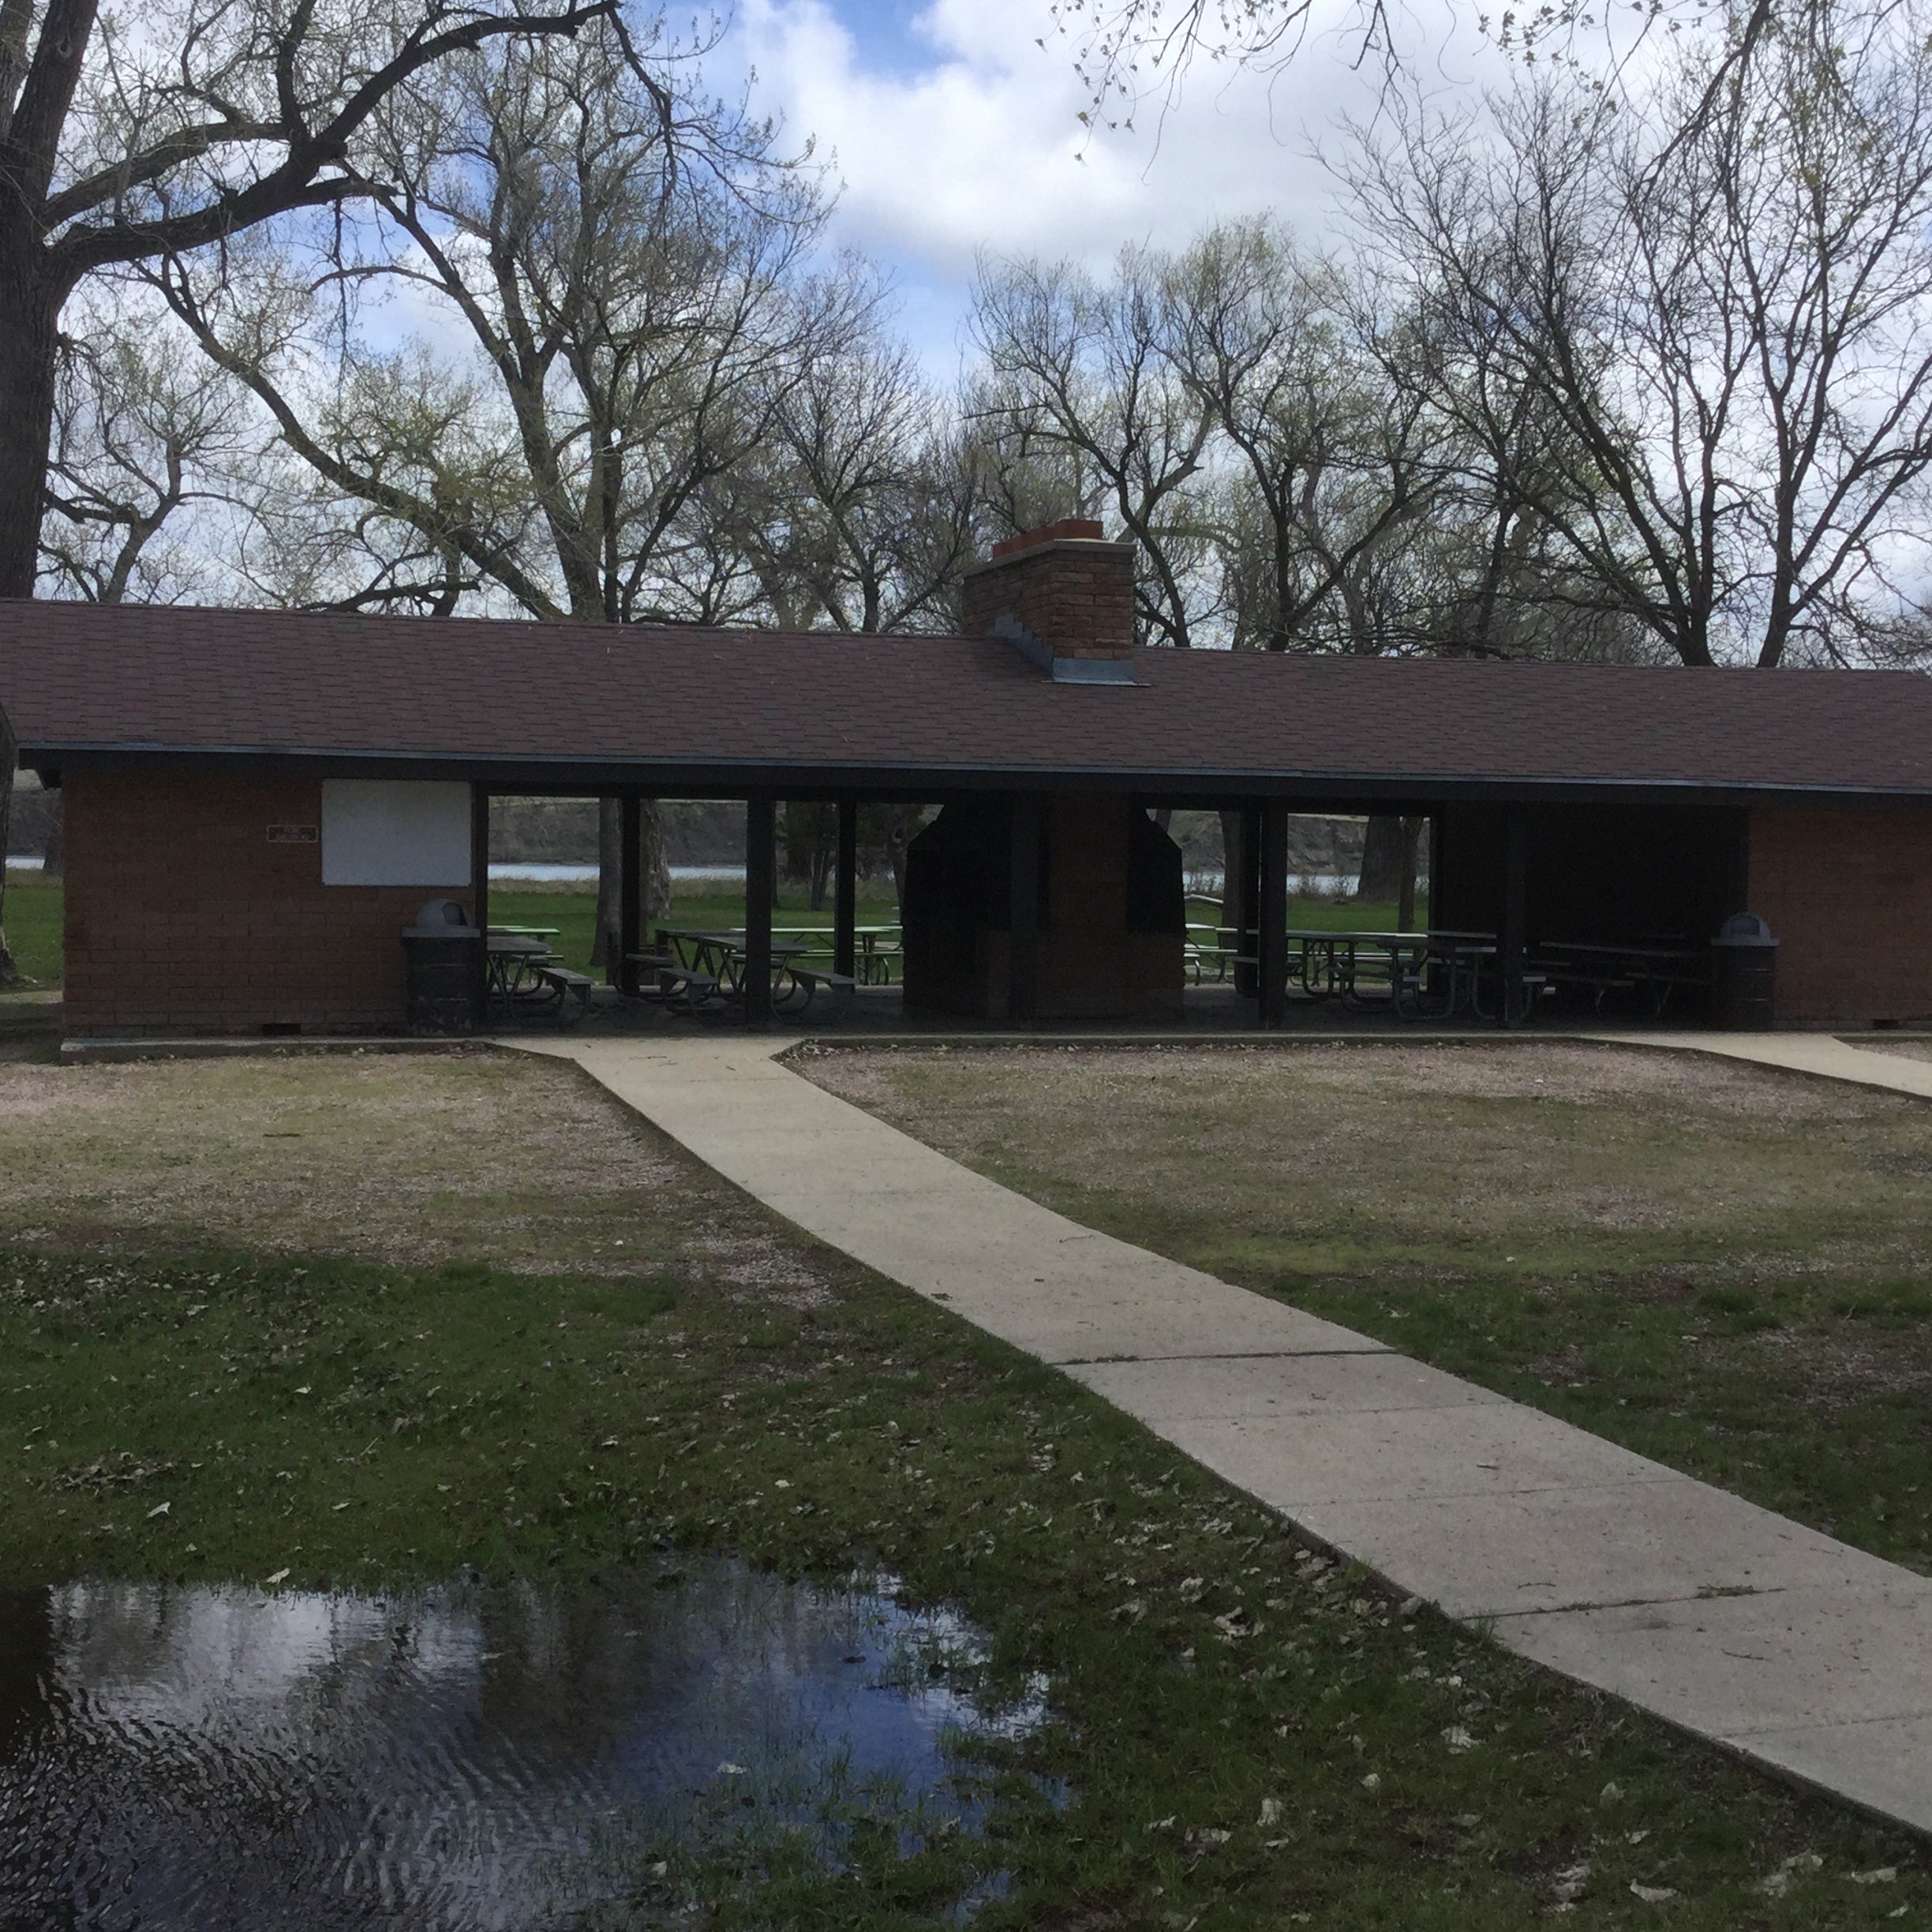 Largest of the 3 picnic shelters